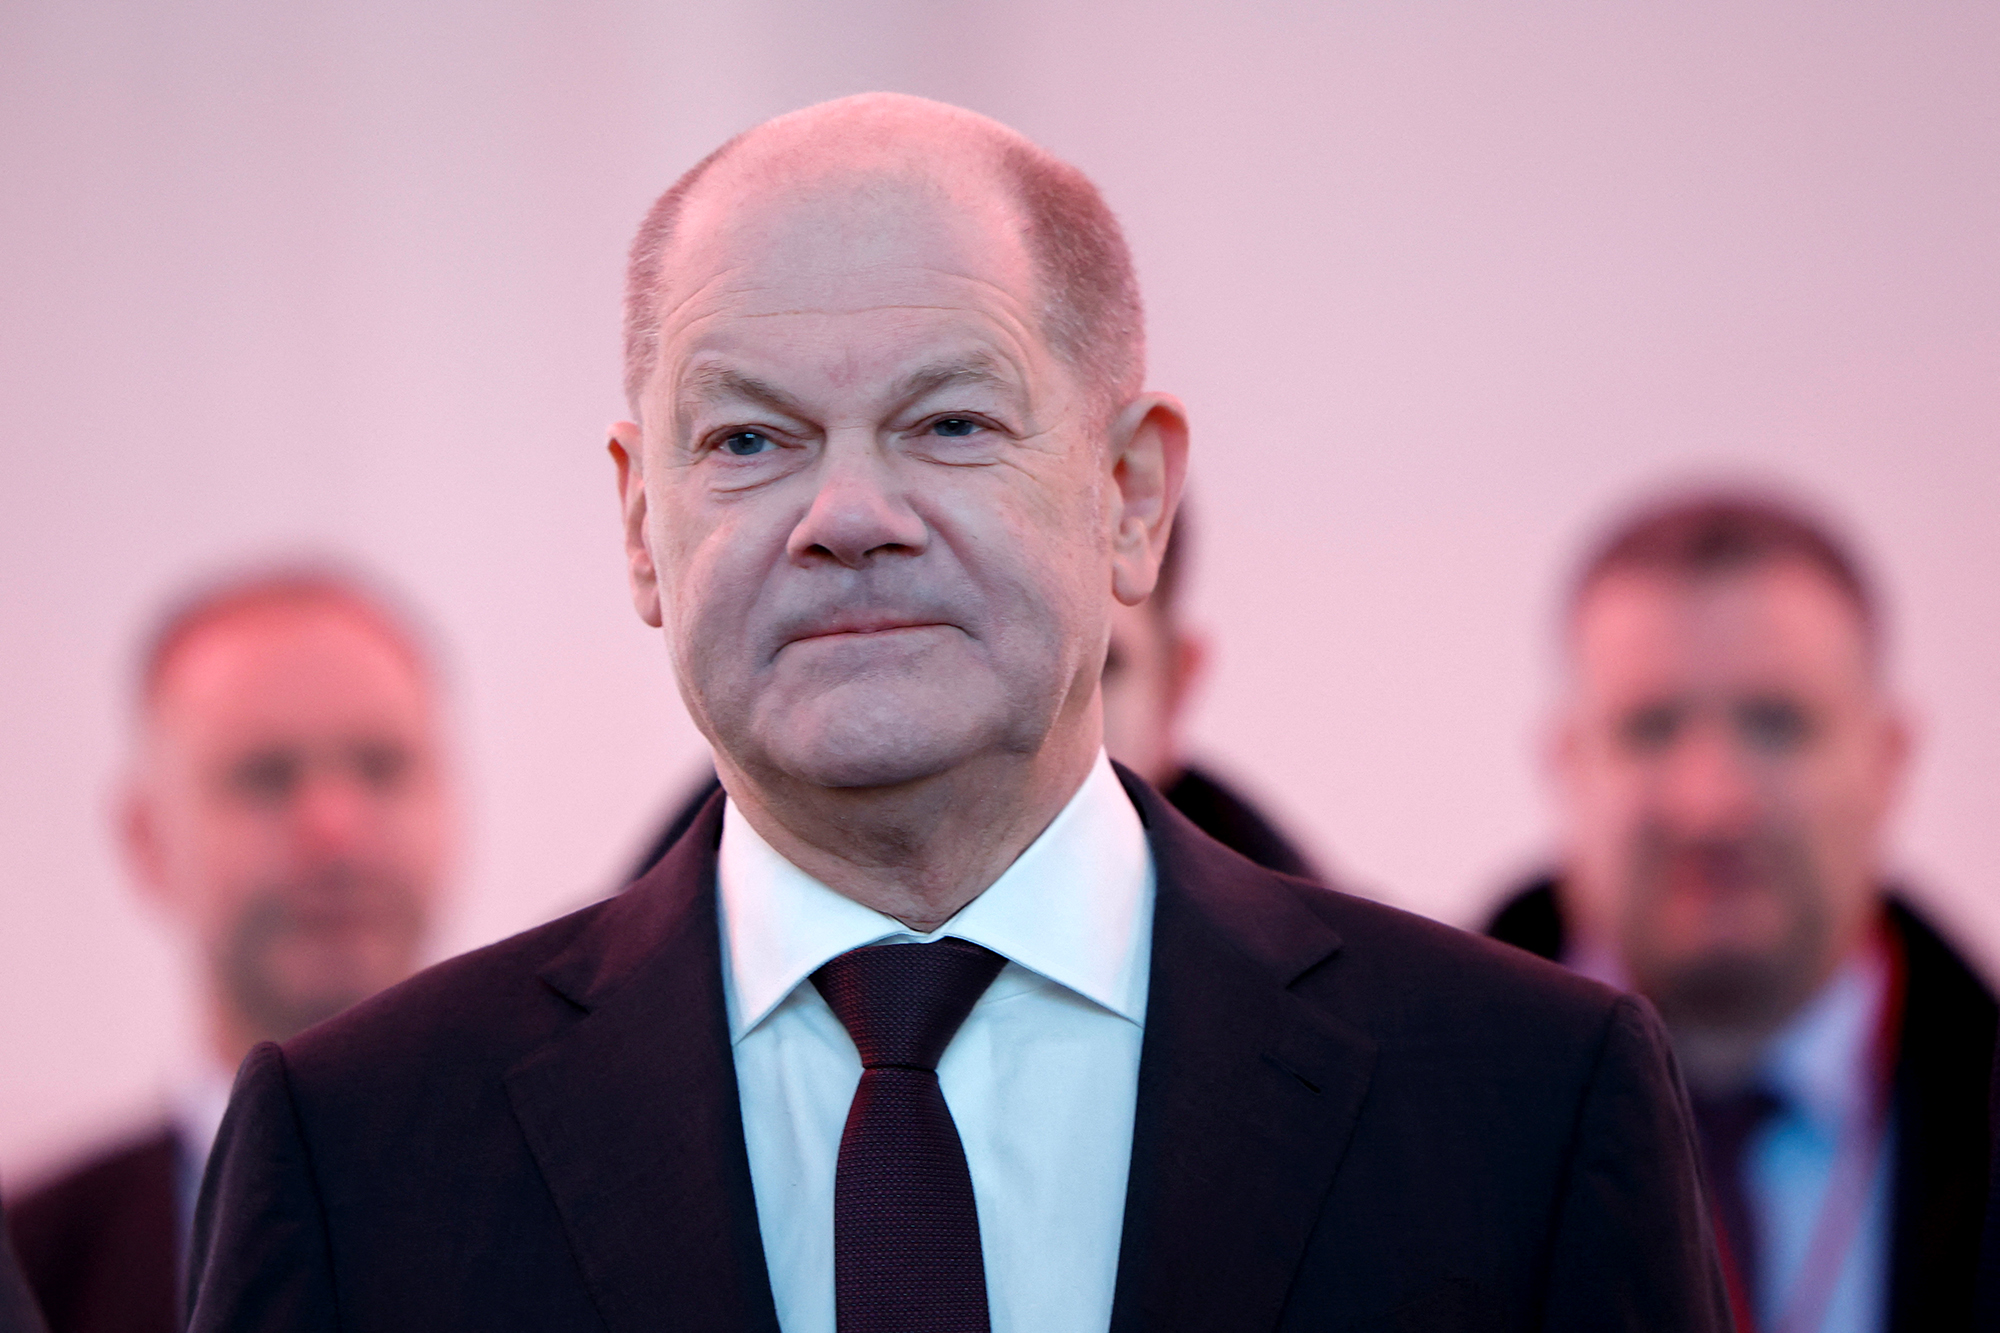 German Chancellor Olaf Scholz attends a groundbreaking ceremony at the new Freiburg-Dietenbach development in Freiburg, Germany, on February 27.